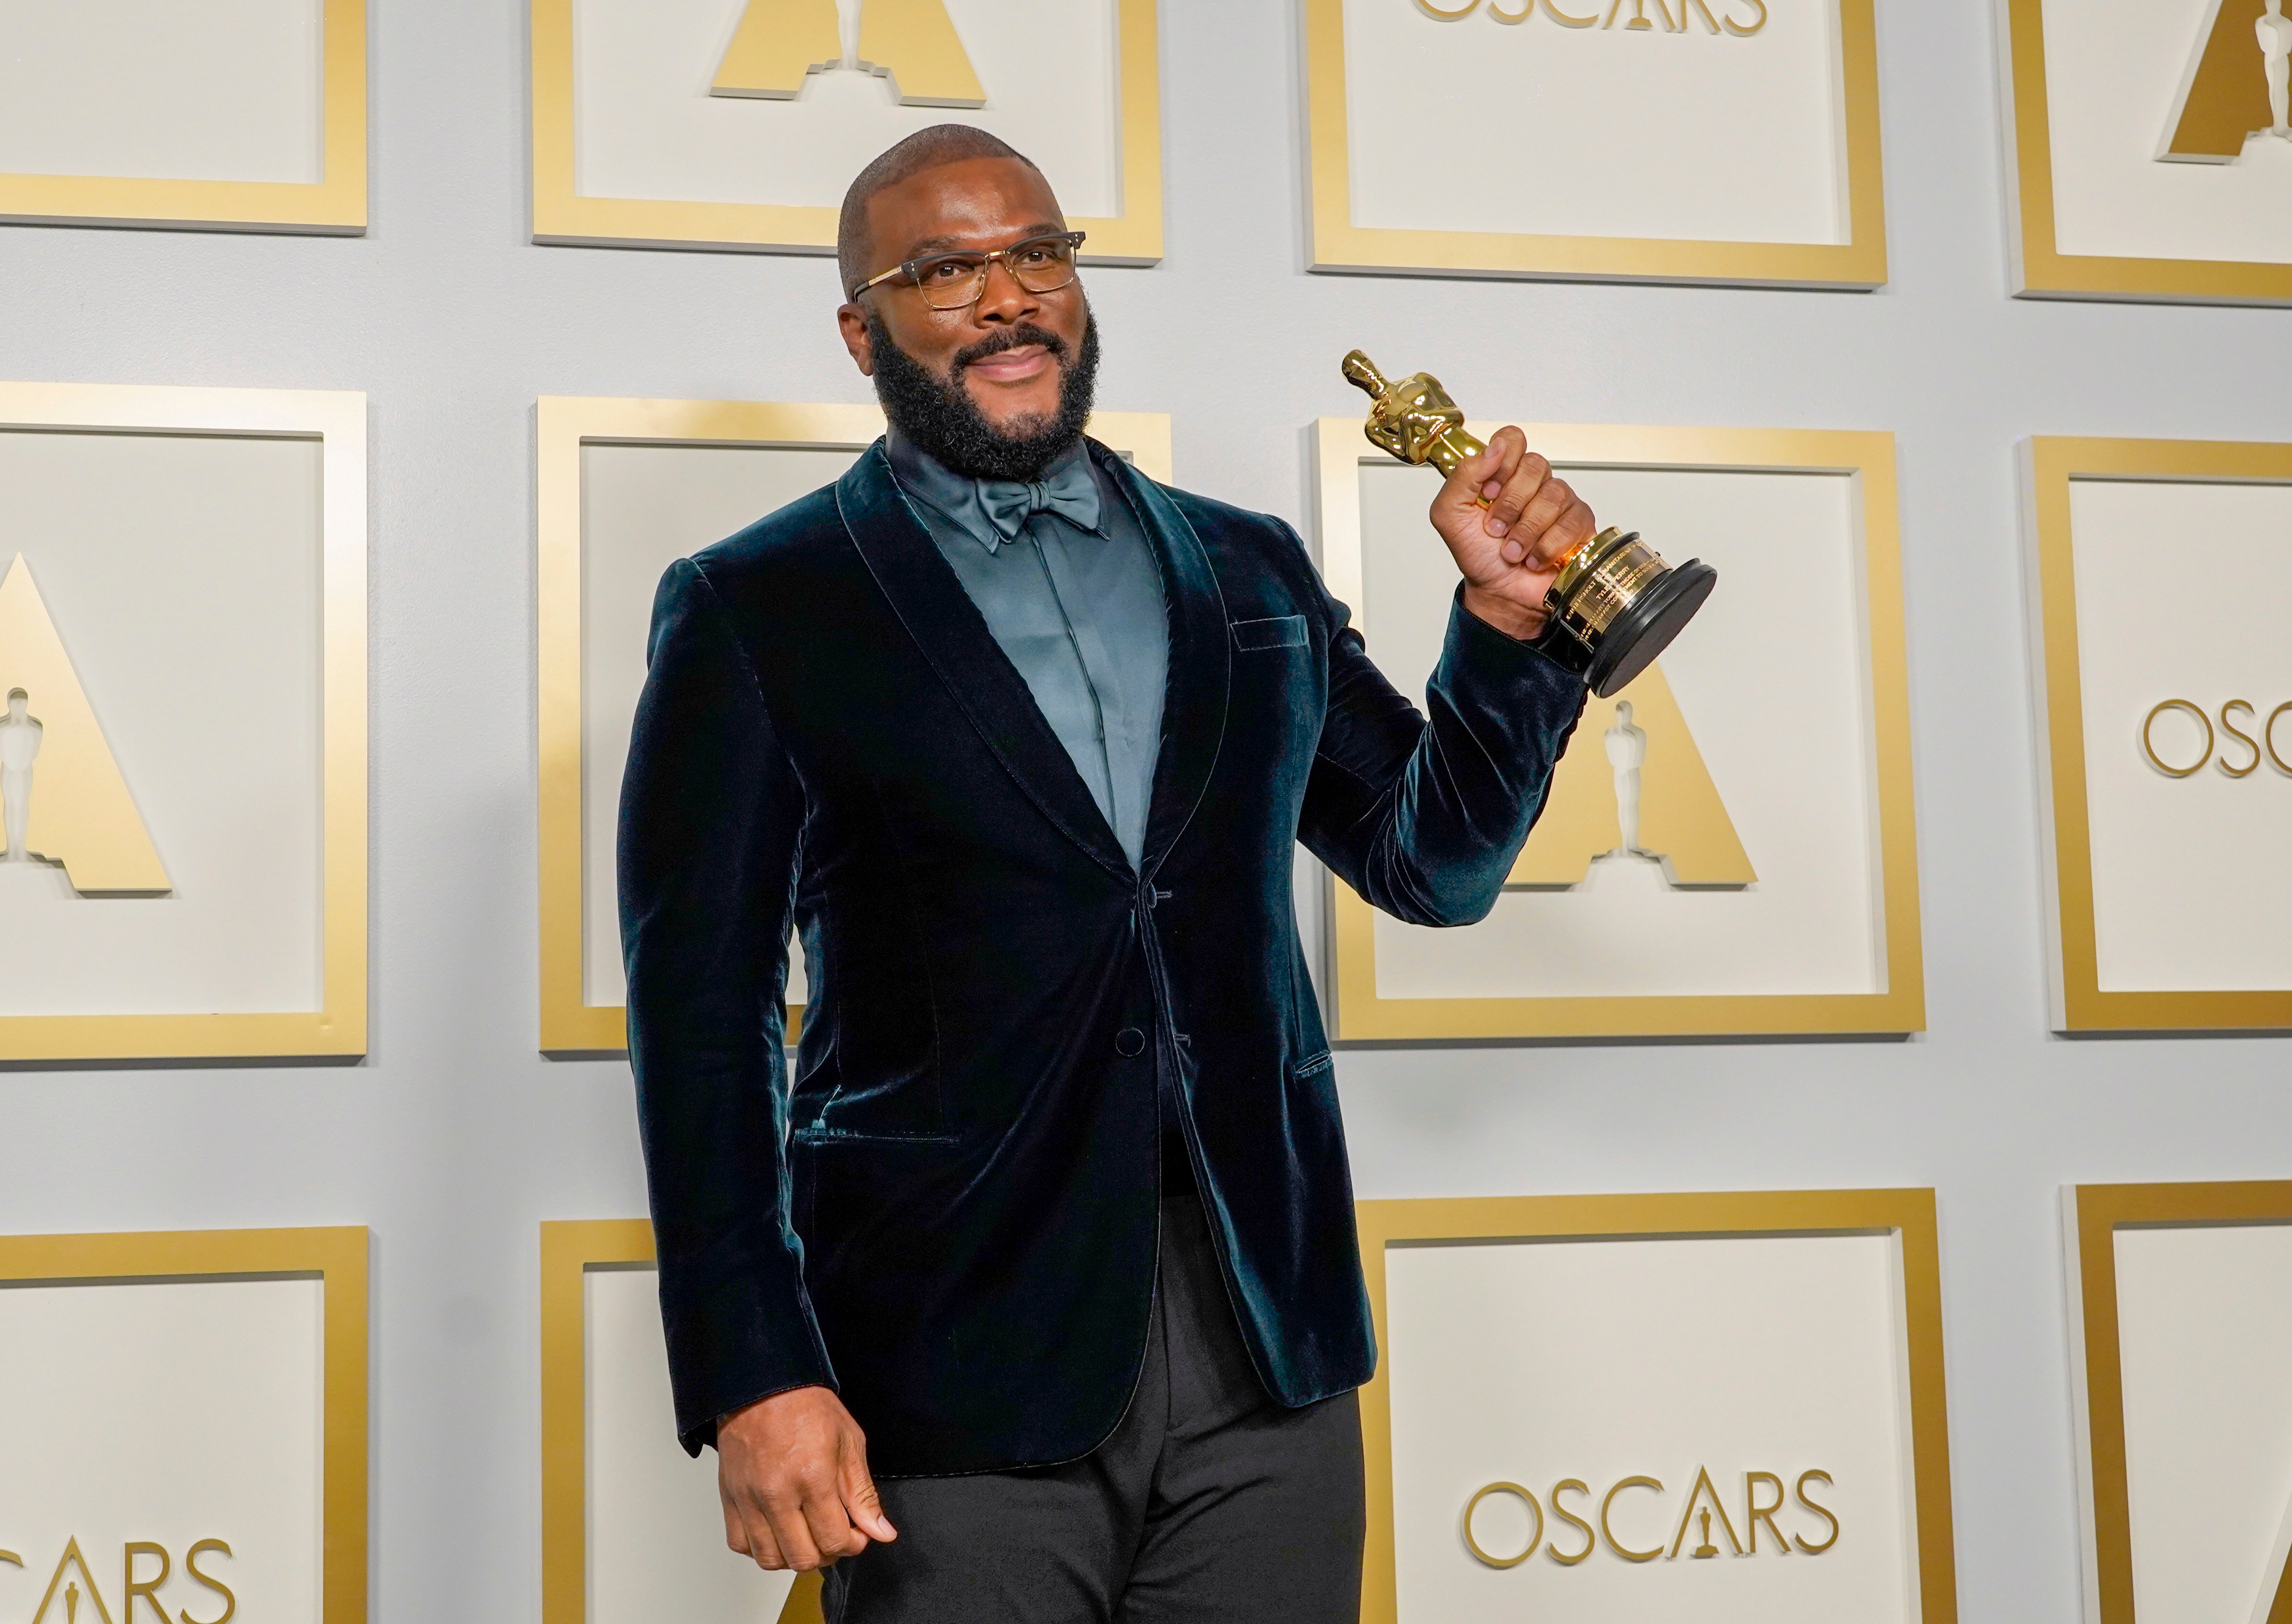 Tyler Perry poses with his hardware in press room at 93rd Oscars after winning humanitarian award